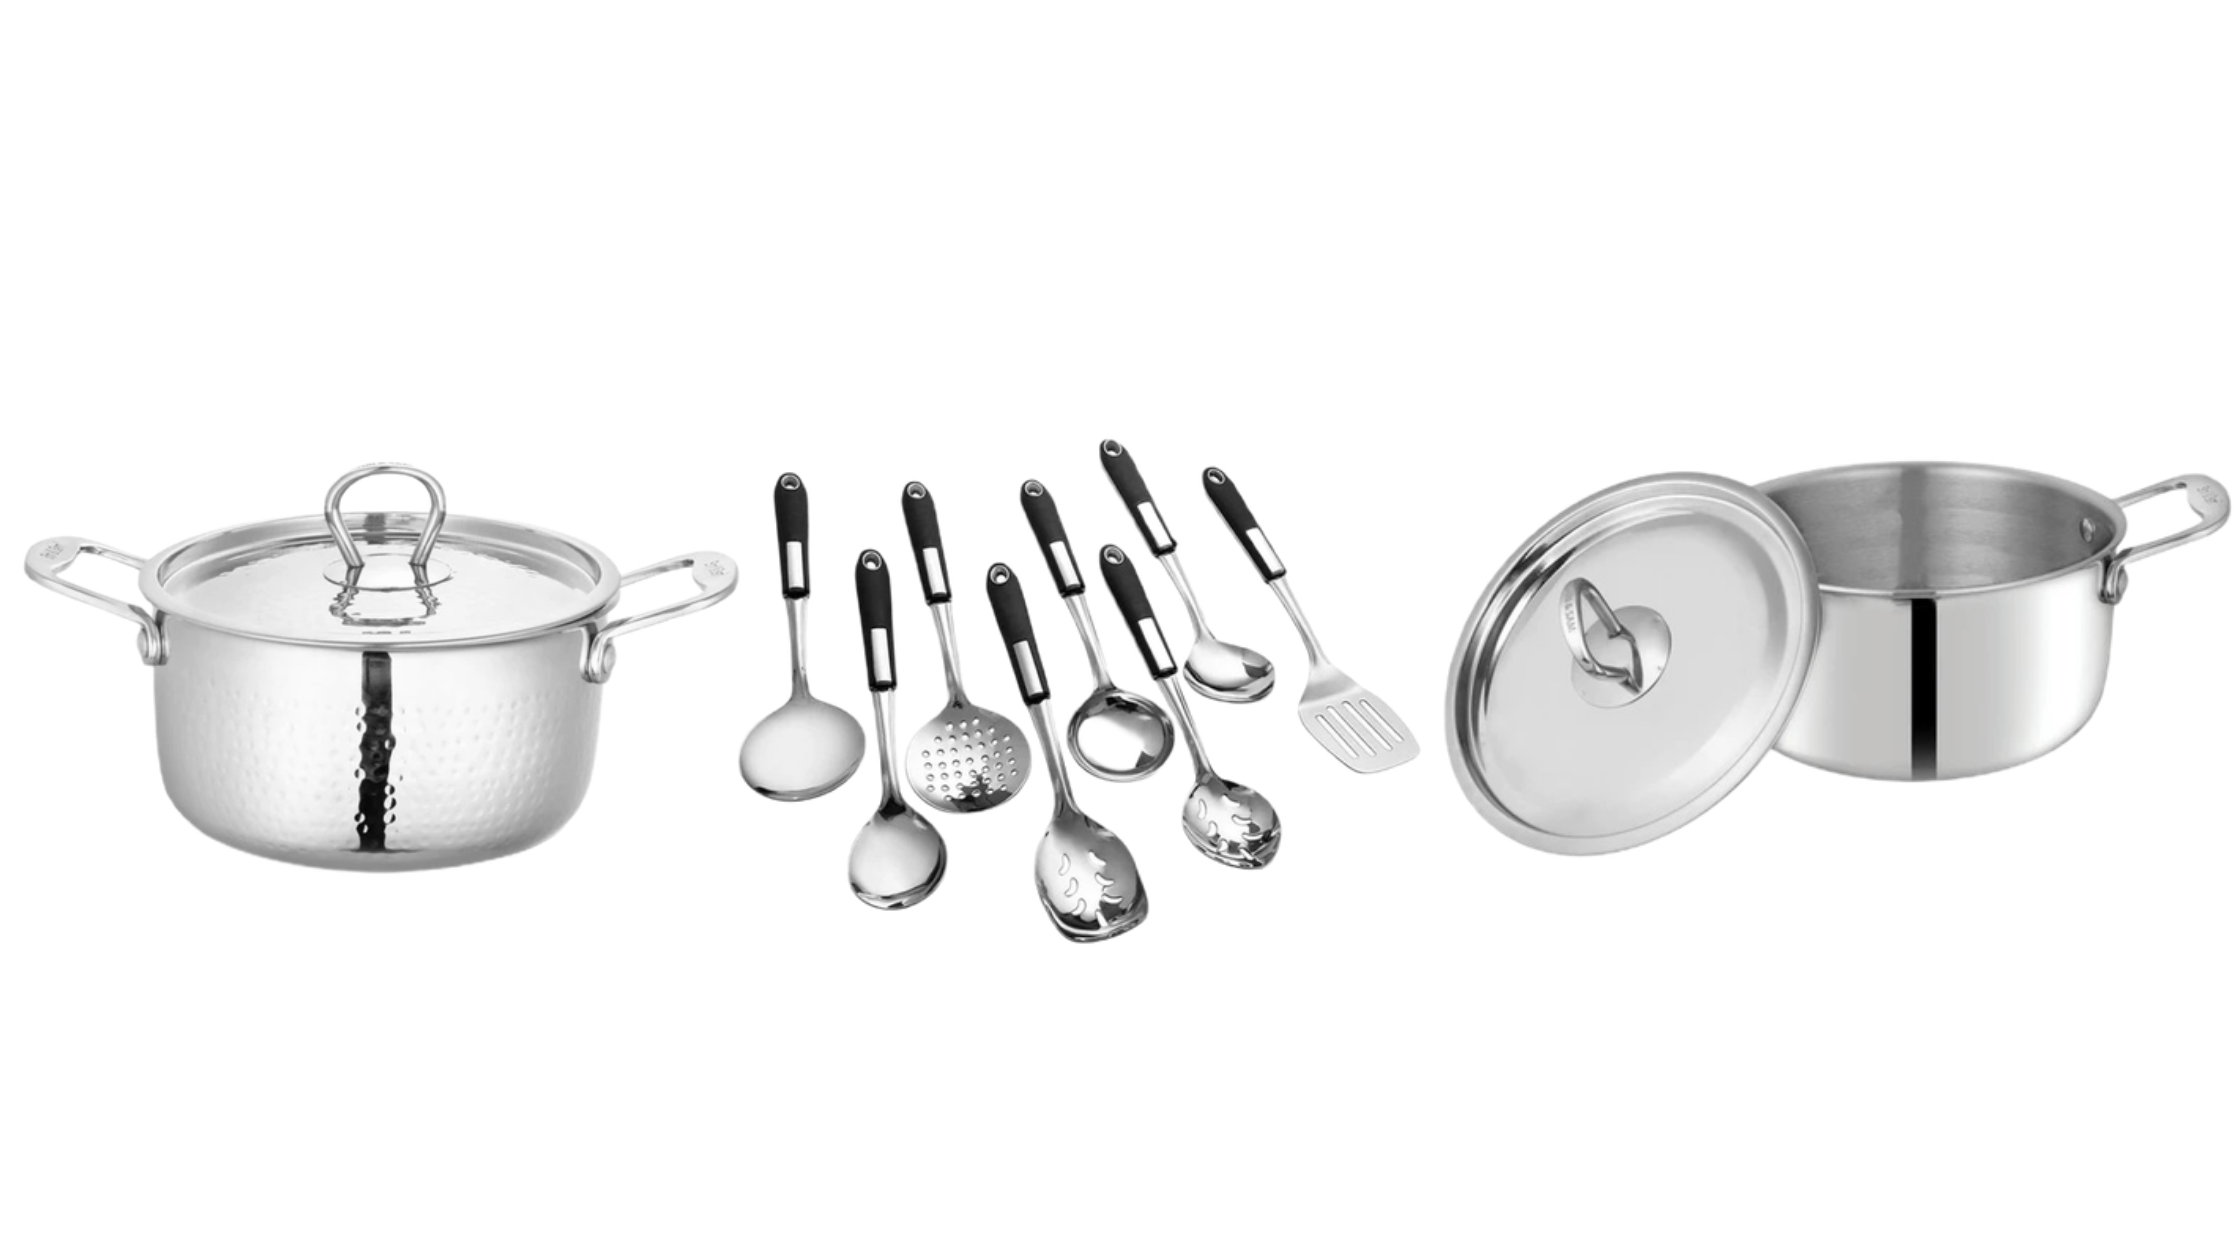 Top 10 Reasons for Considering Stainless-Steel Cookware